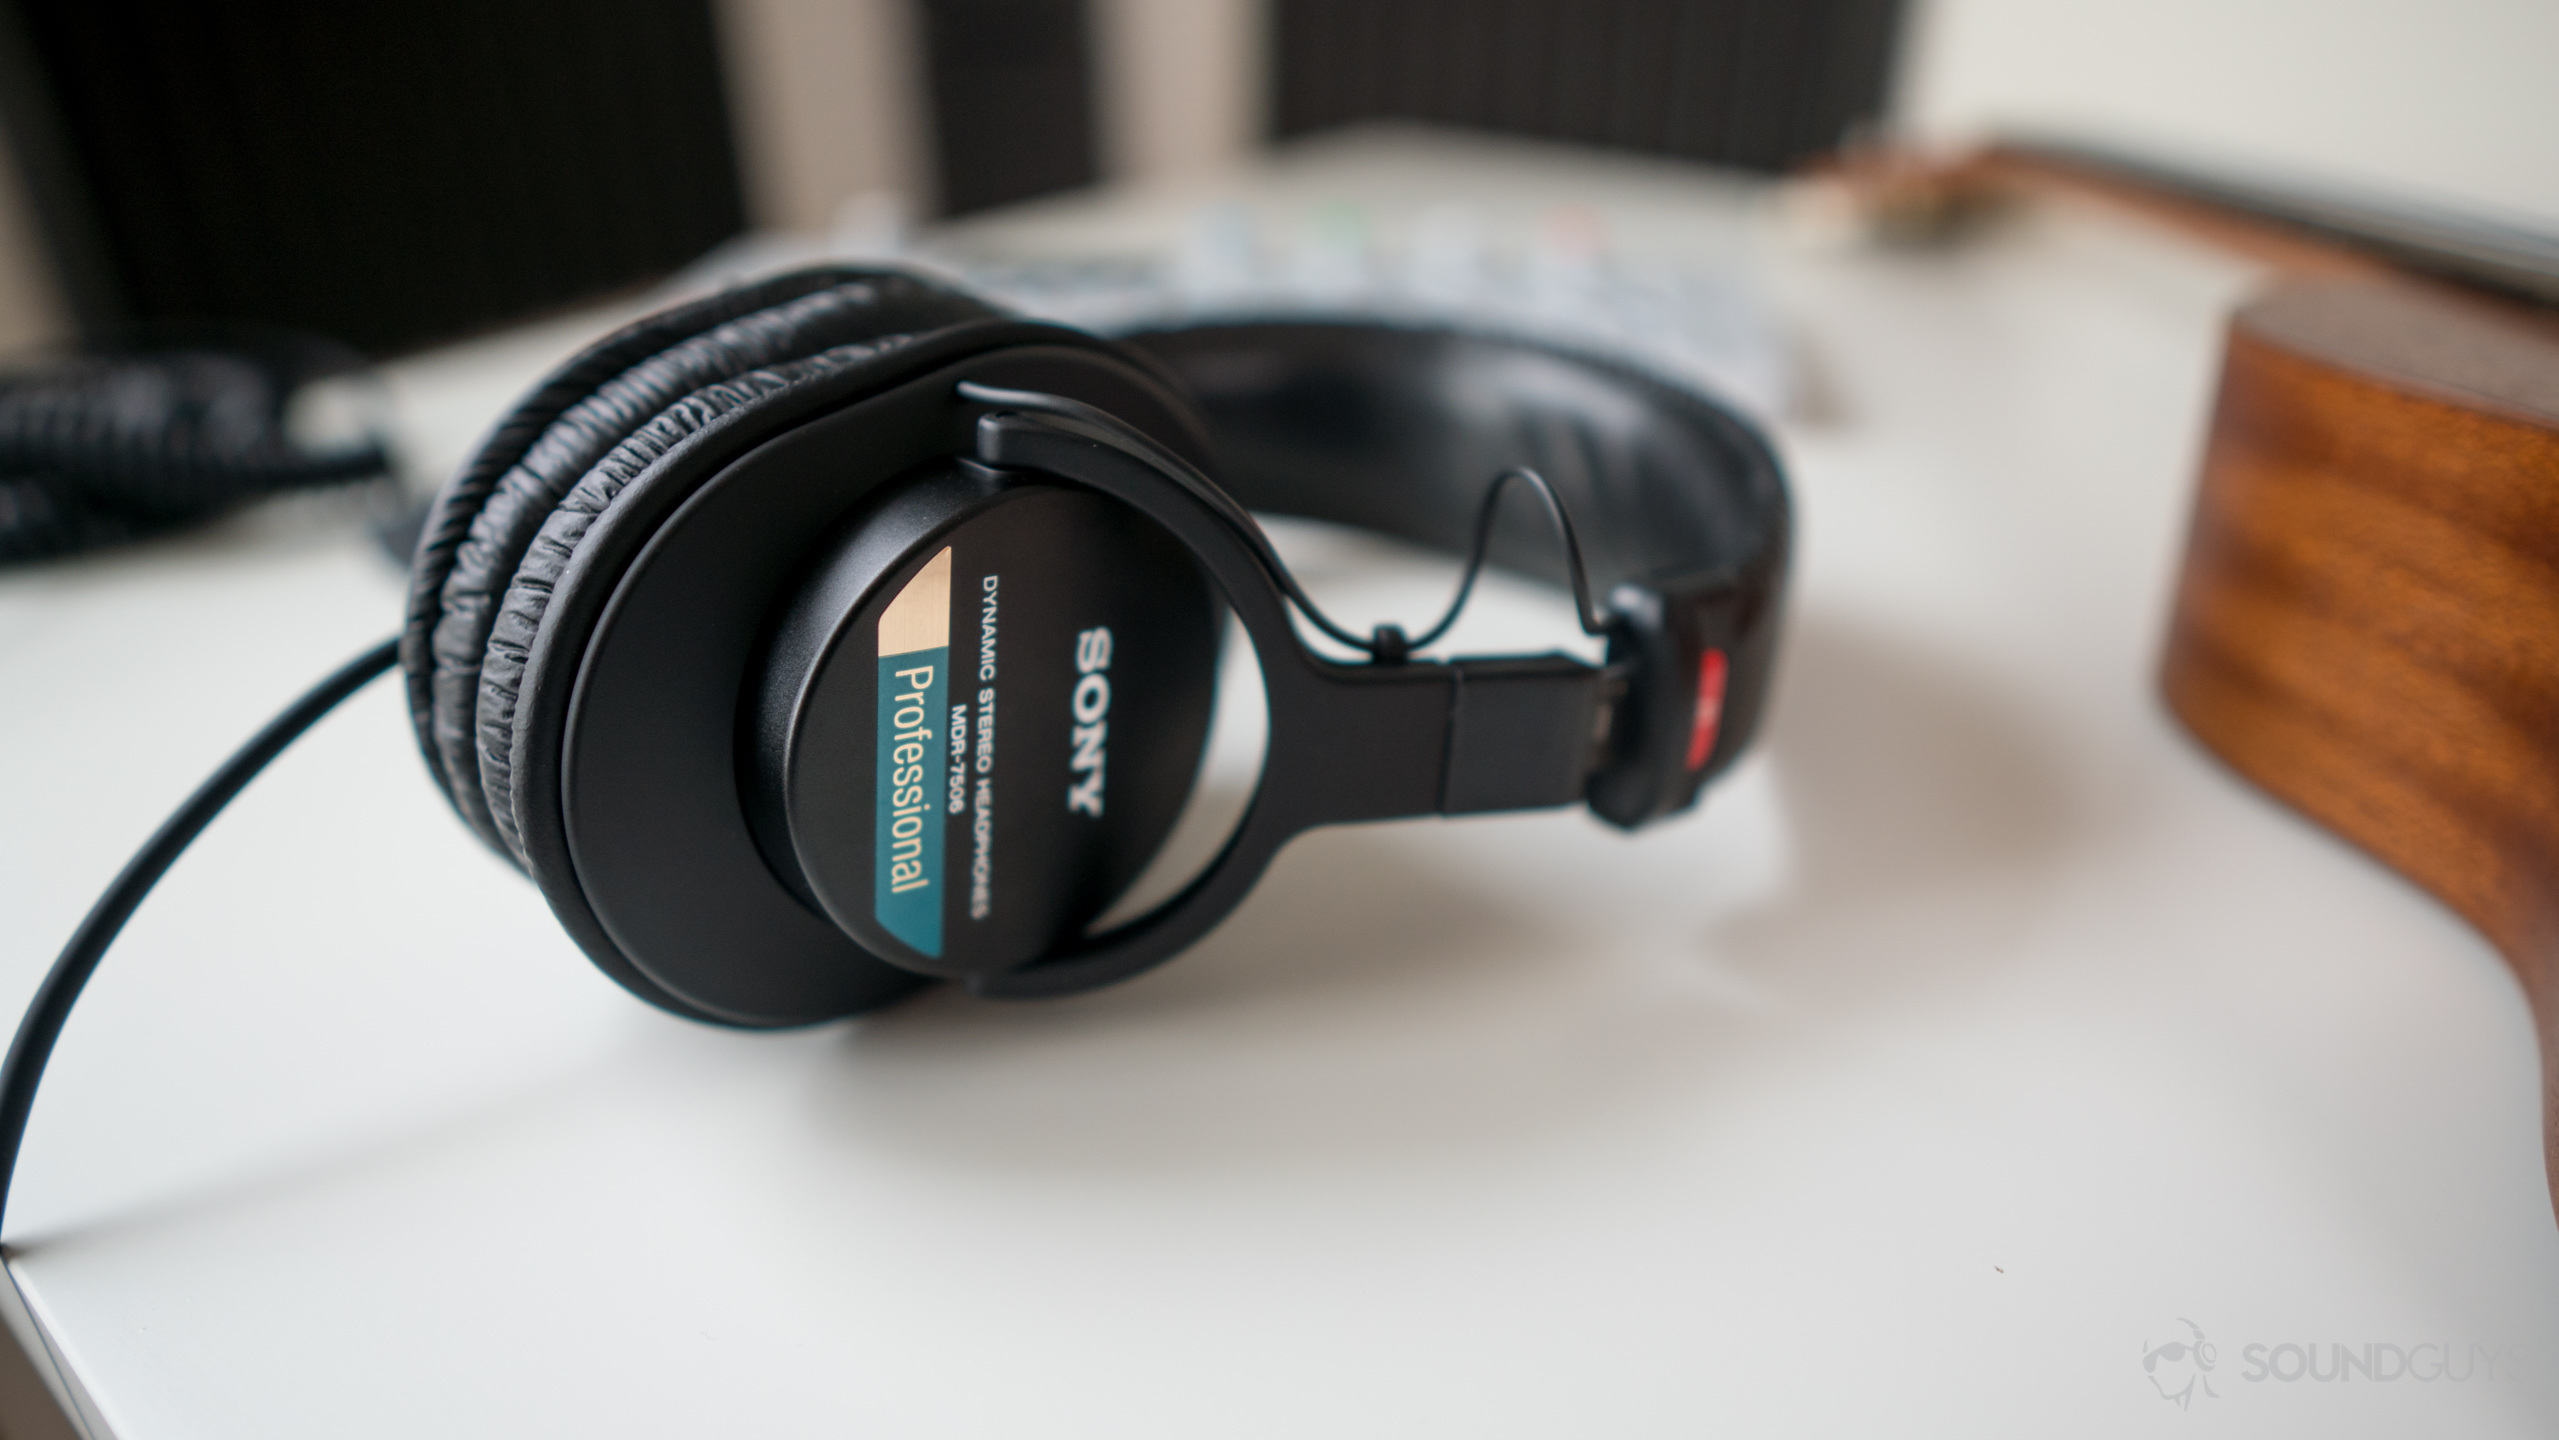 Sony MDR-7506 review: An industry standard - SoundGuys